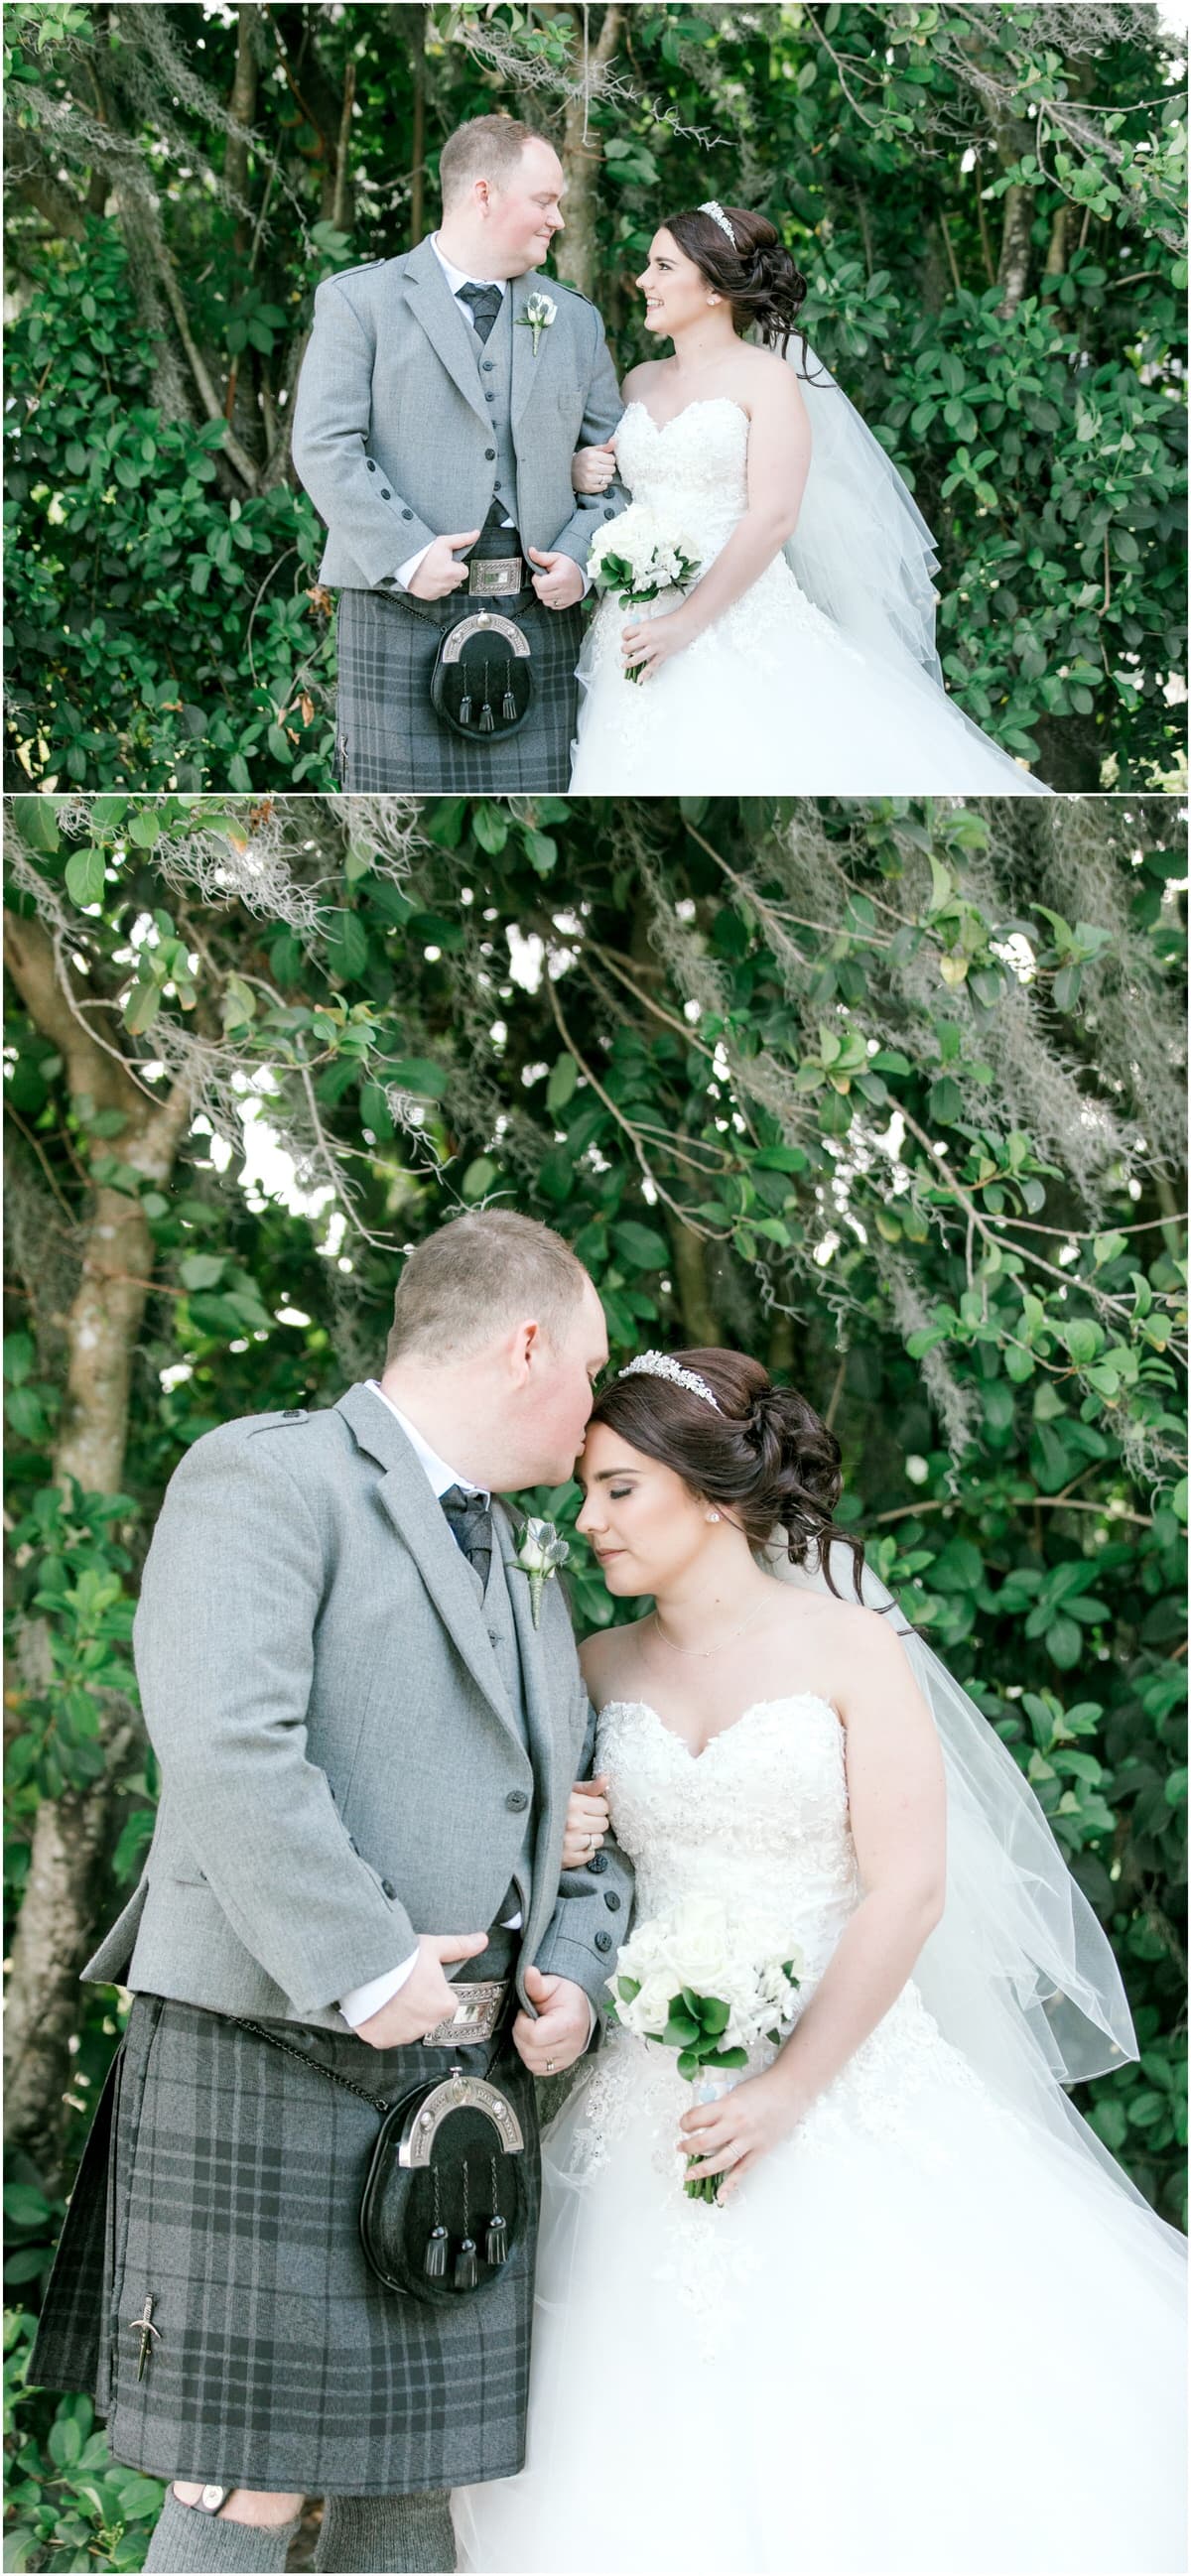 Bride and groom taking portraits outside in front of greenery. 